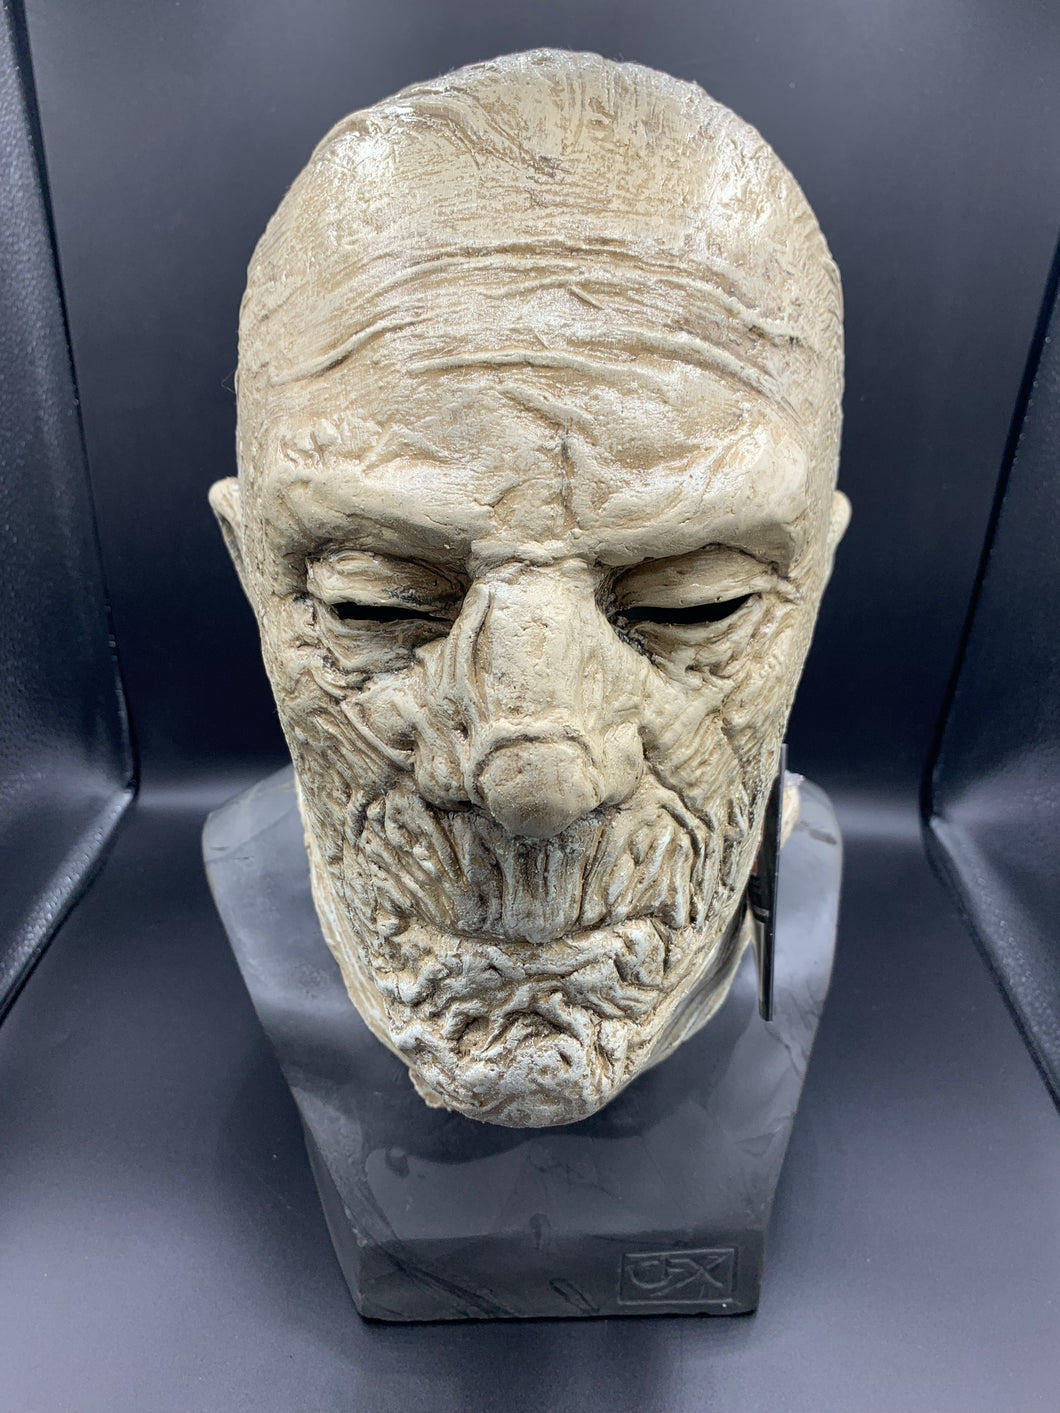 UNIVERSAL CLASSIC MONSTERS - IMHOTEP THE MUMMY MASK